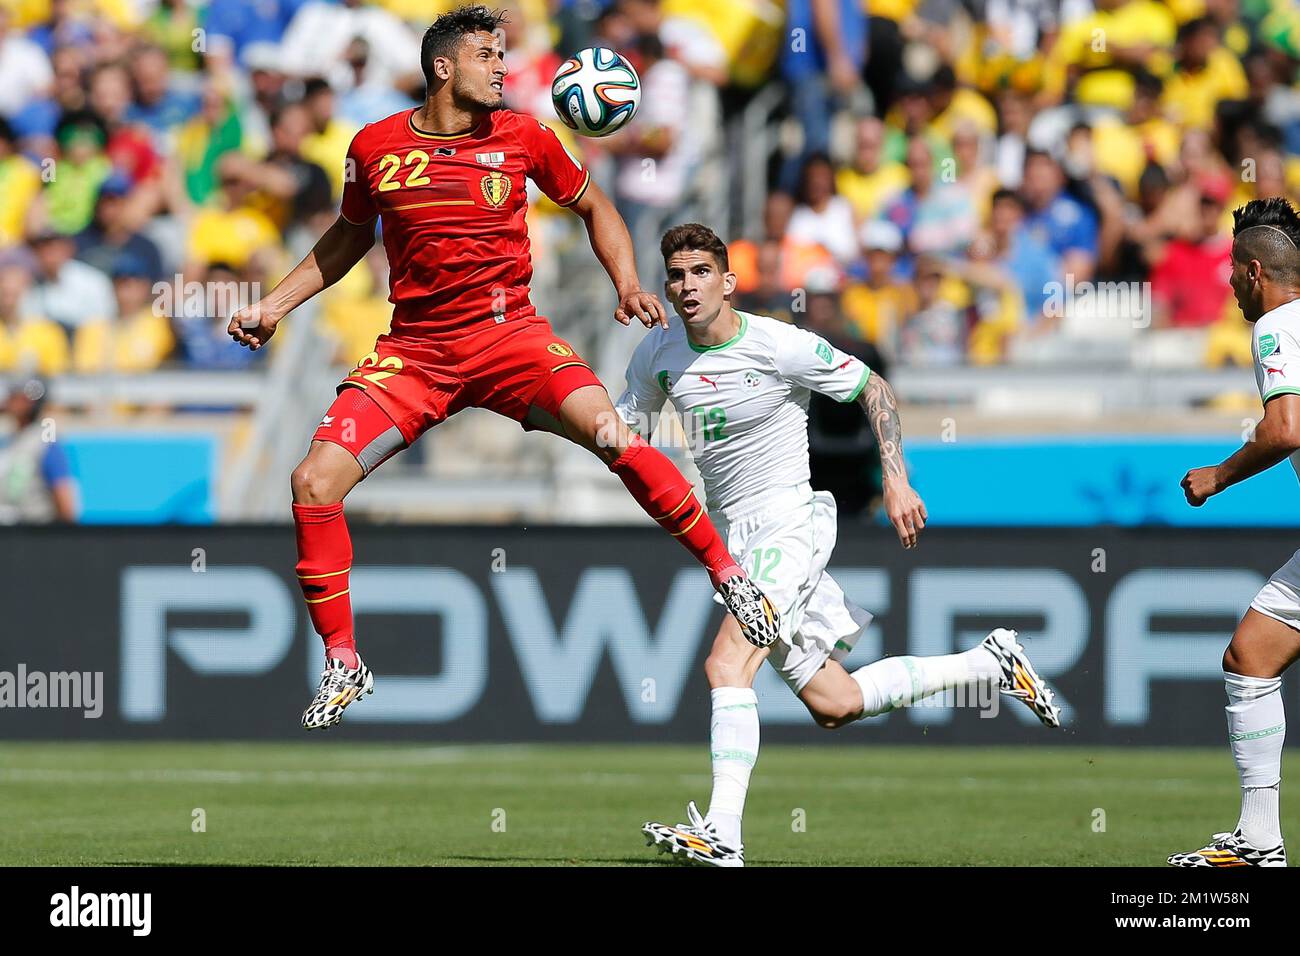 Belgium's Nacer Chadli and Algeria's Carl Medjani fight for the ball during a soccer game between Belgian national team The Red Devils and Algeria in Belo Horizonte, Brazil, the first game in Group H of the first round of the 2014 FIFA World Cup, Tuesday 17 June 2014. Stock Photo